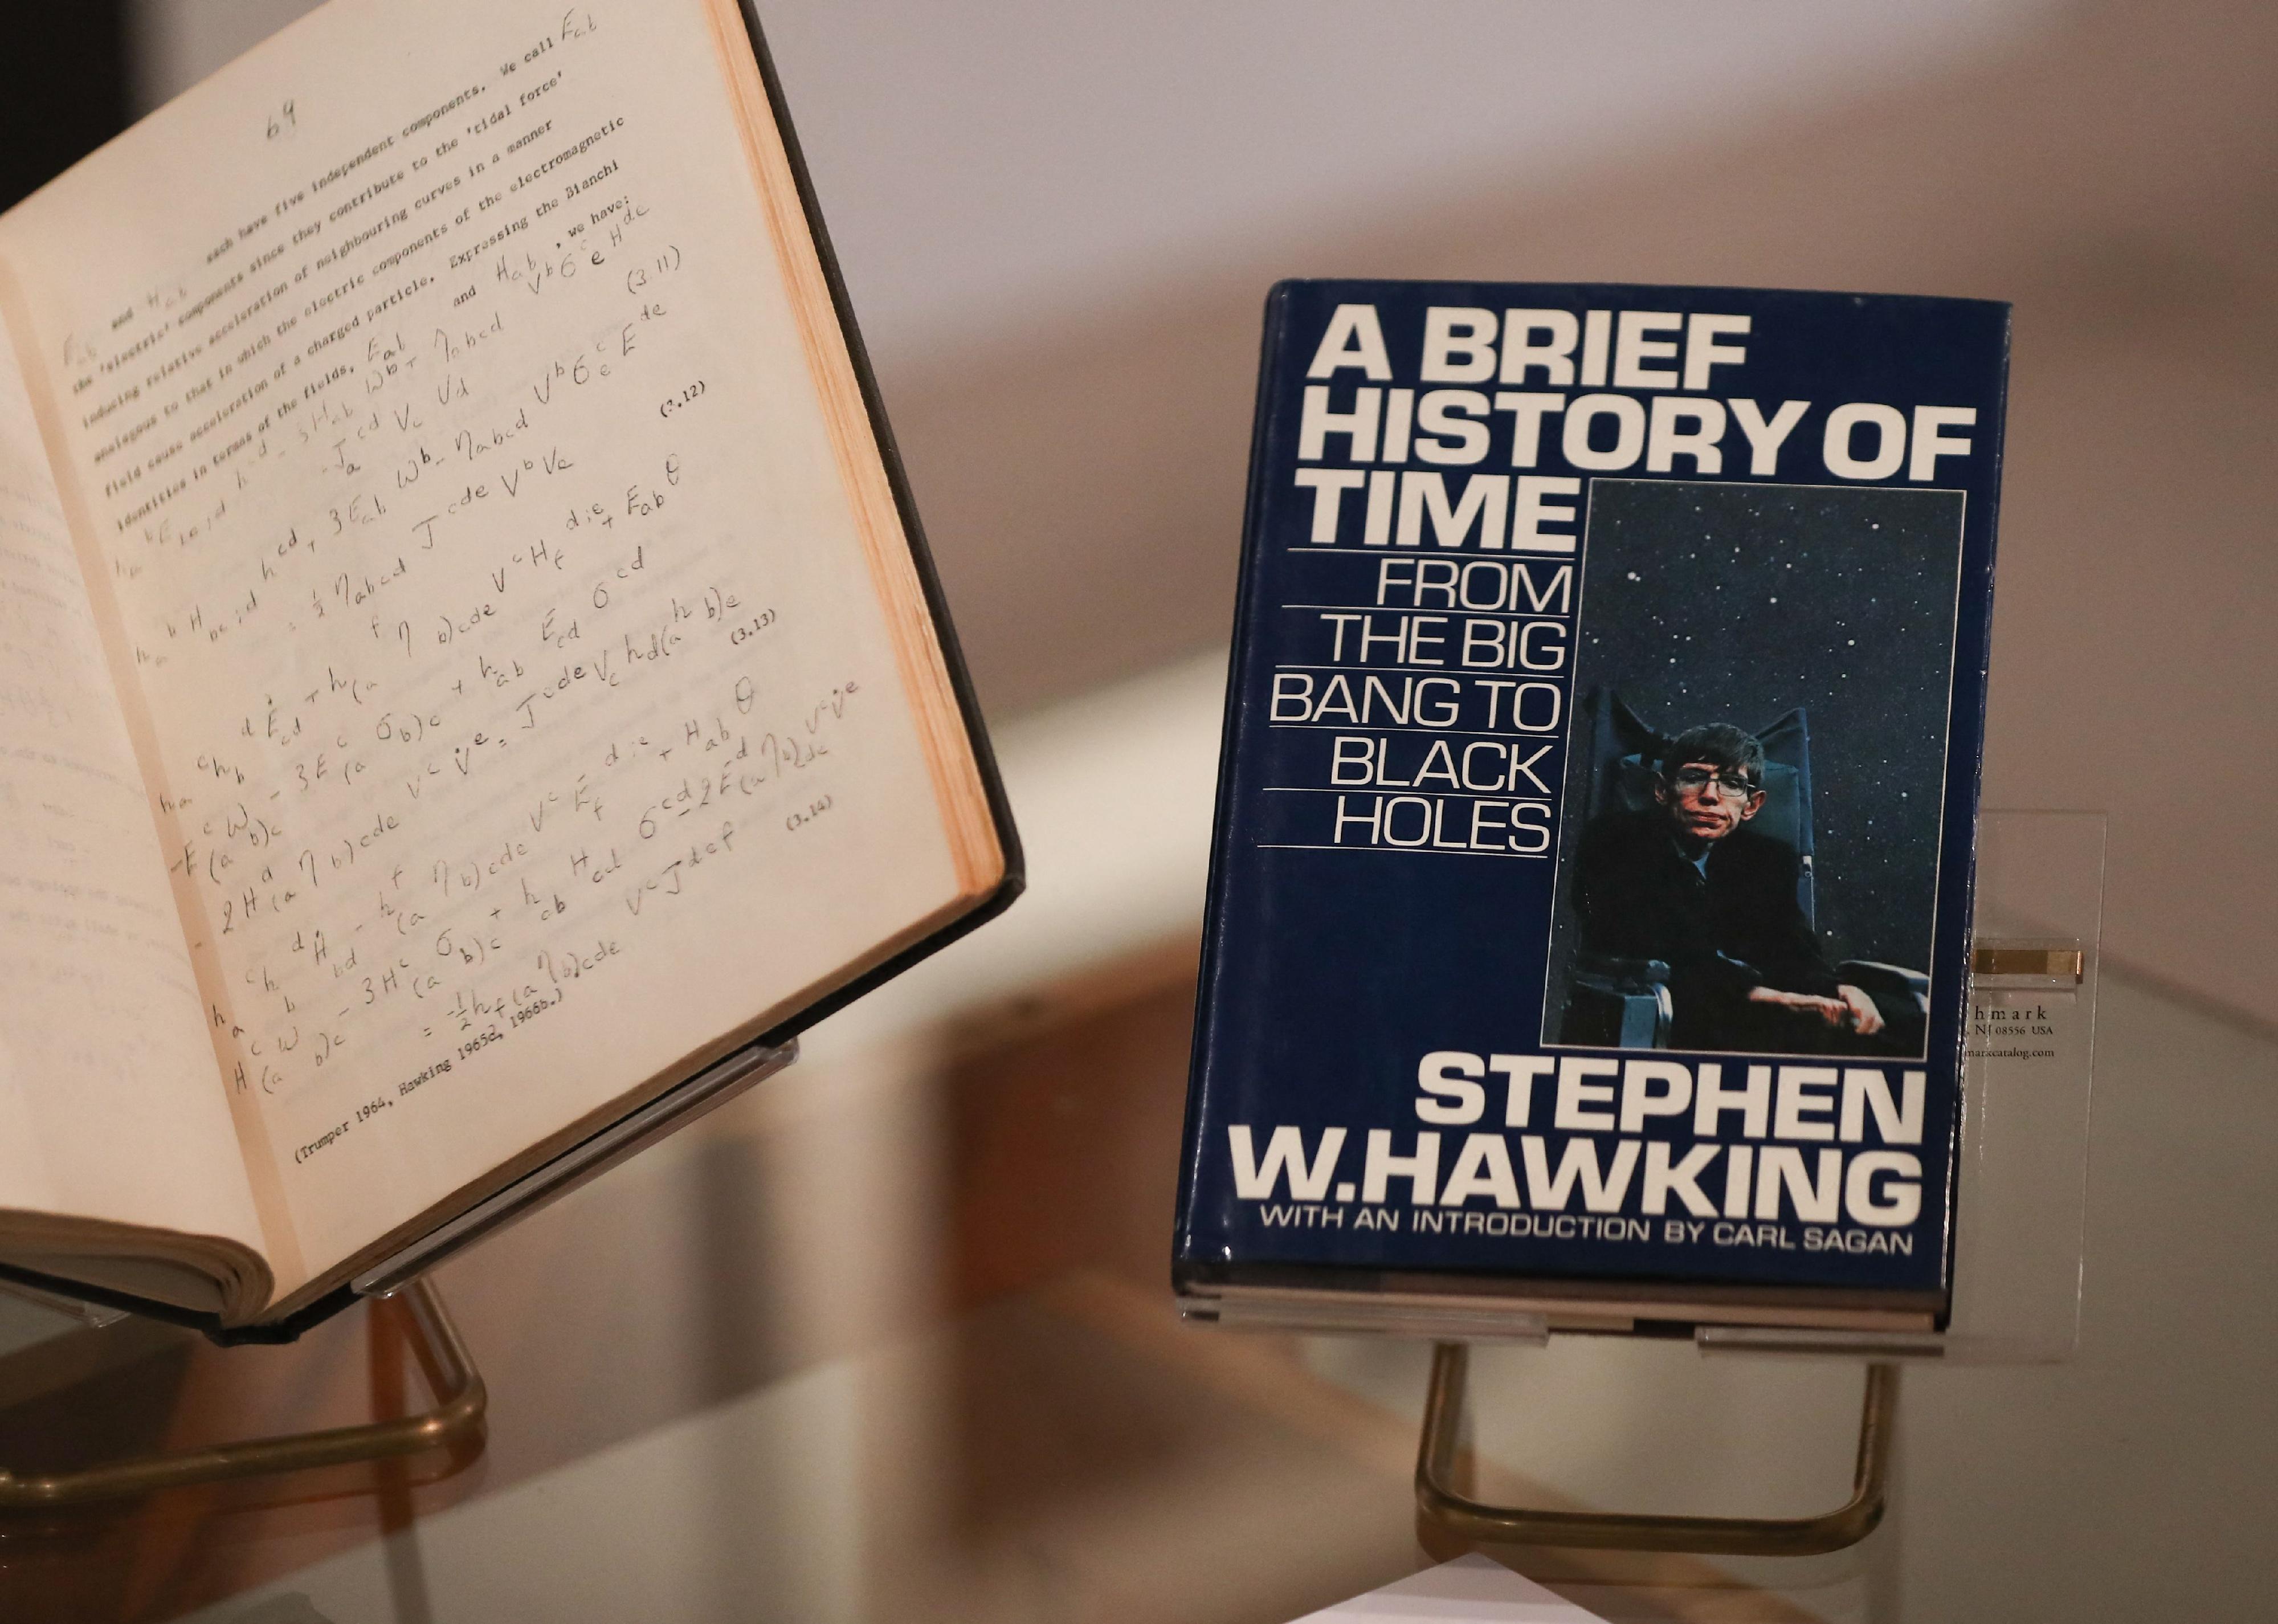 A picture shows the book 'A Brief History of Time' by theoretical physicist Stephen Hawking signed with a thumbprint.